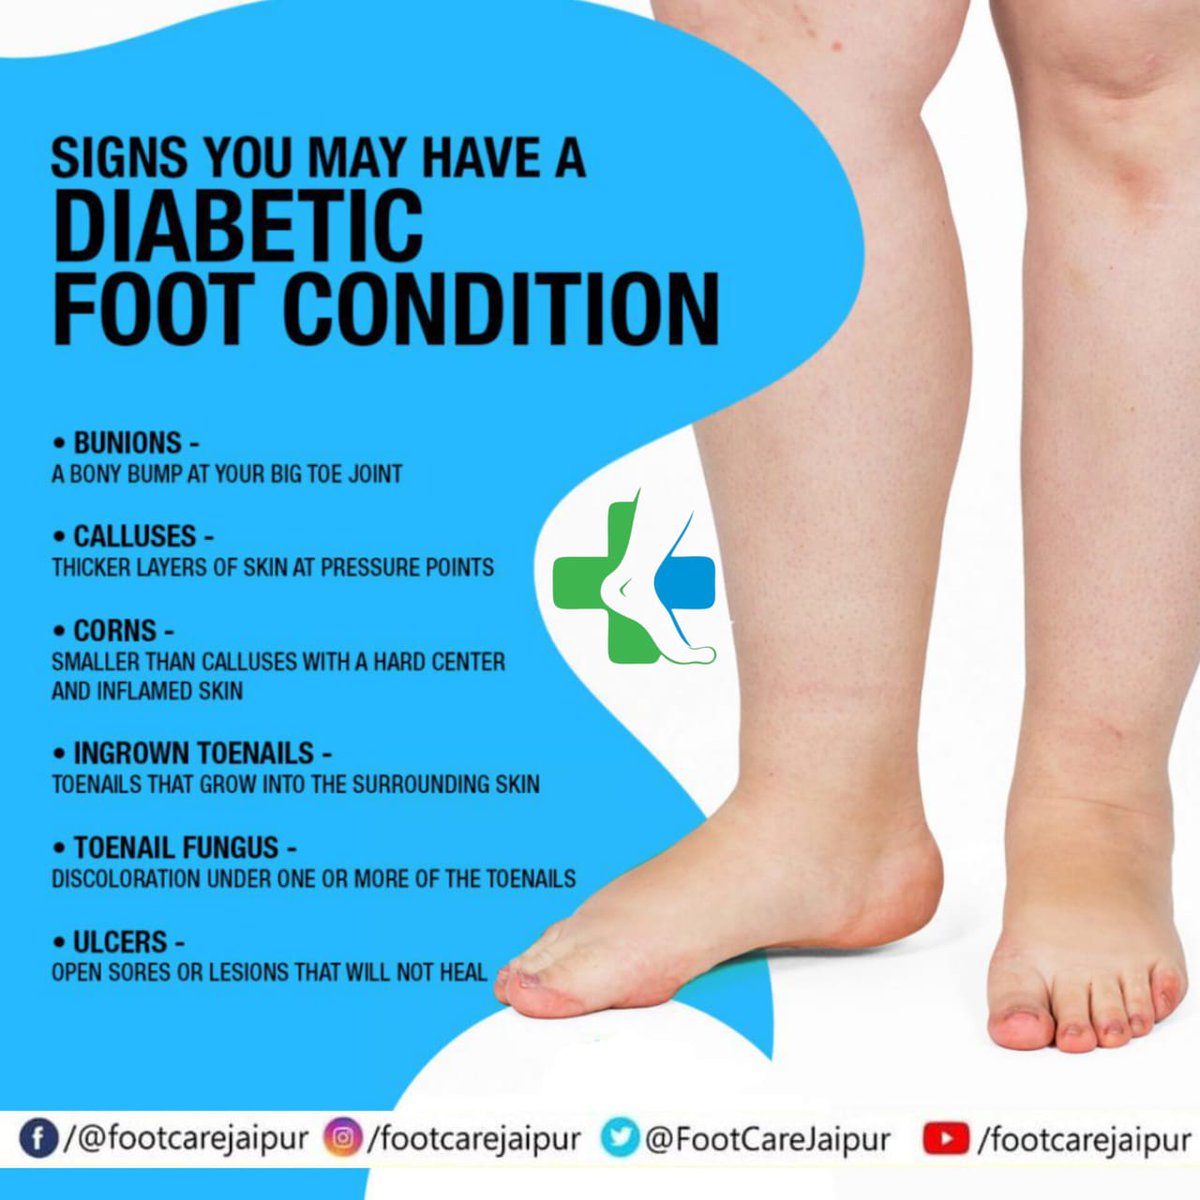 Diabetic foot has become one of the Major reasons for Amputation. 

Anyone who is diabetic is advised to see a Podiatrist/ Foot Doctor/ Orthotist on regular intervals for needful intervention to reduce risk.

#FootCareJaipur 
#FootProblems 
#diabetes 
#DiabeticFoot
#FlatFoot